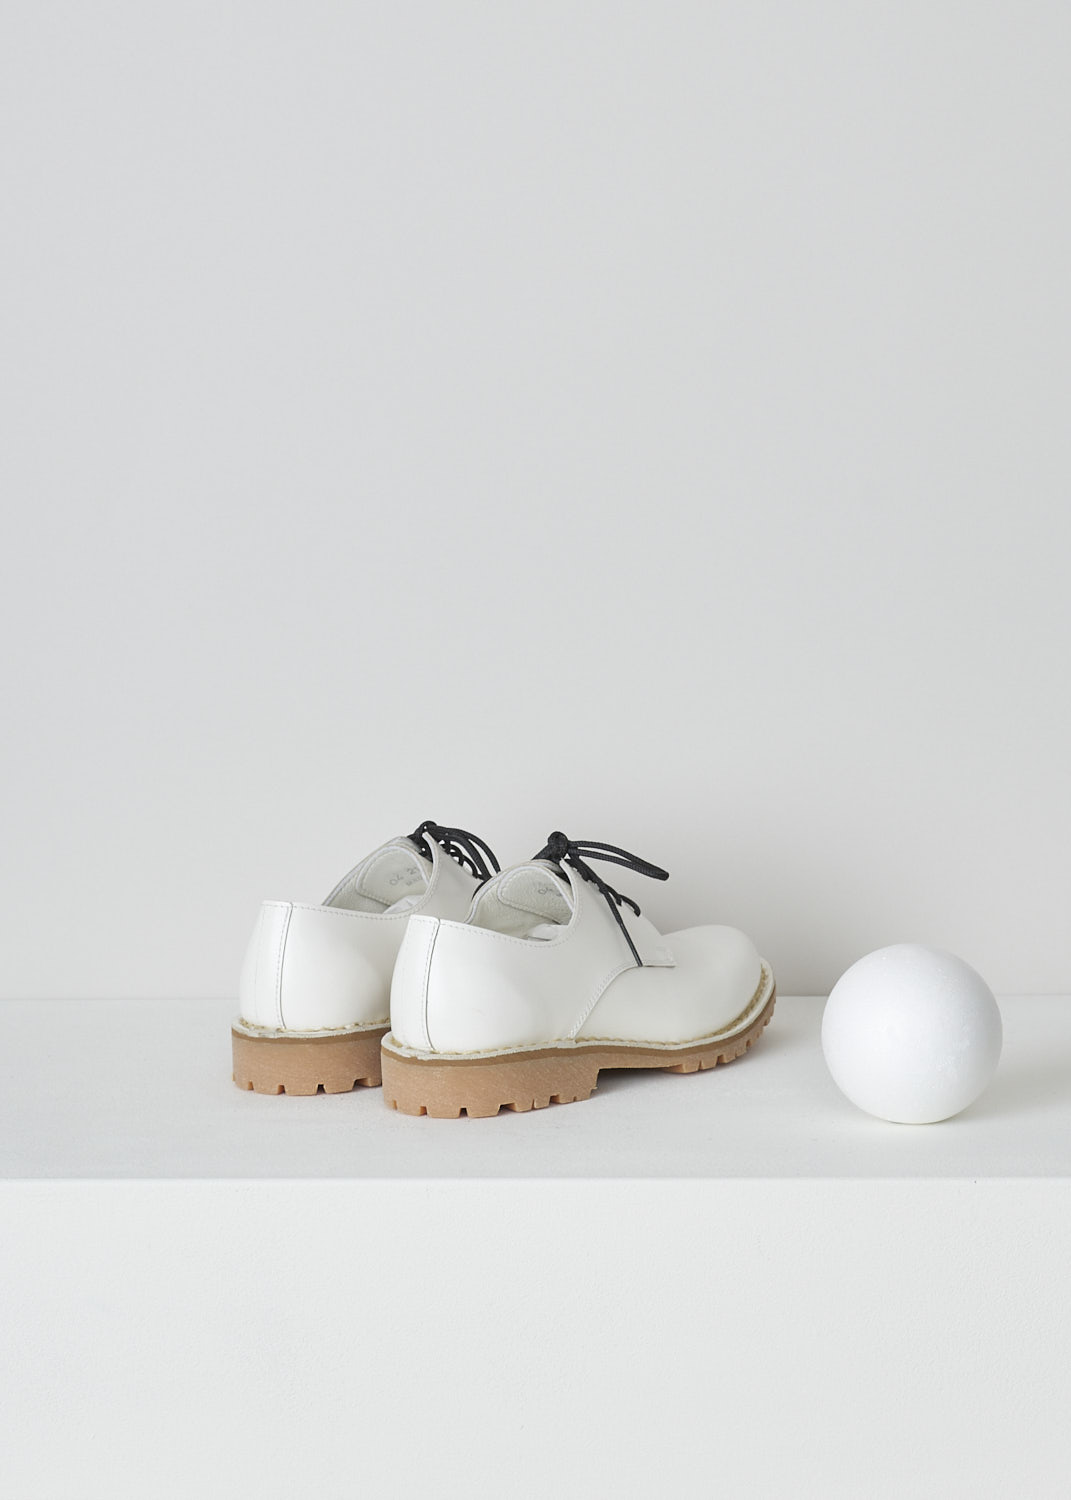 SOFIE Dâ€™HOORE, WHITE DERBY SHOES WITH BLACK LACES, FILOS_LJAZ_WHITE, White, Back, These white leather derby shoes have a round nose and a classic lace-up closing with contrasting black laces. The shoes have sturdy Vibram soles. 

